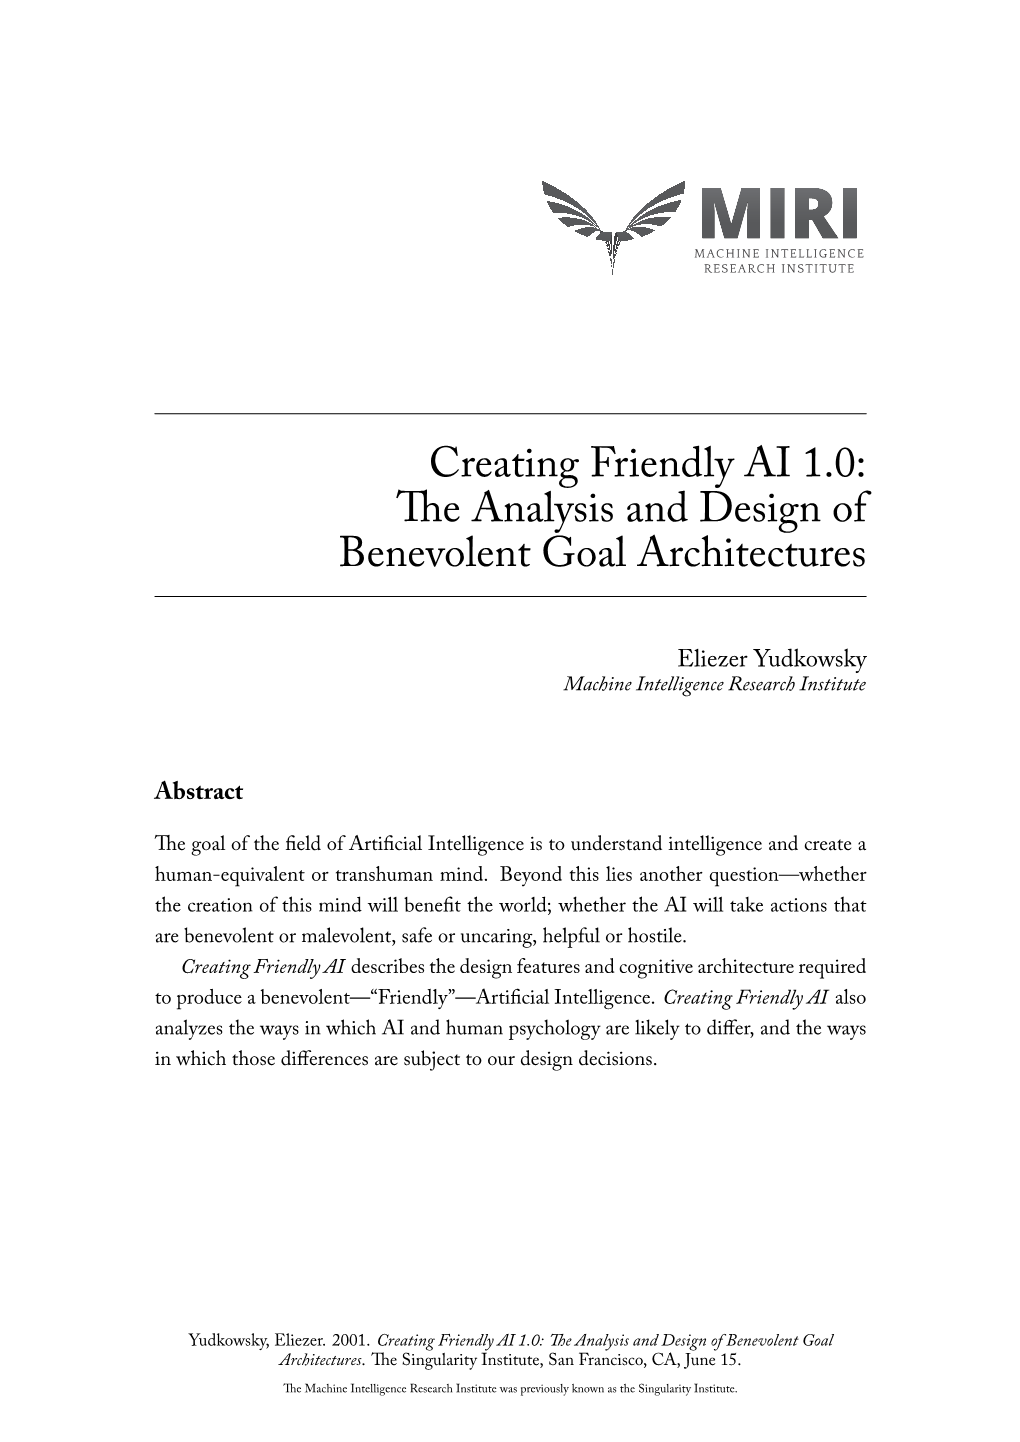 Creating Friendly AI 1.0: the Analysis and Design of Benevolent Goal Architectures